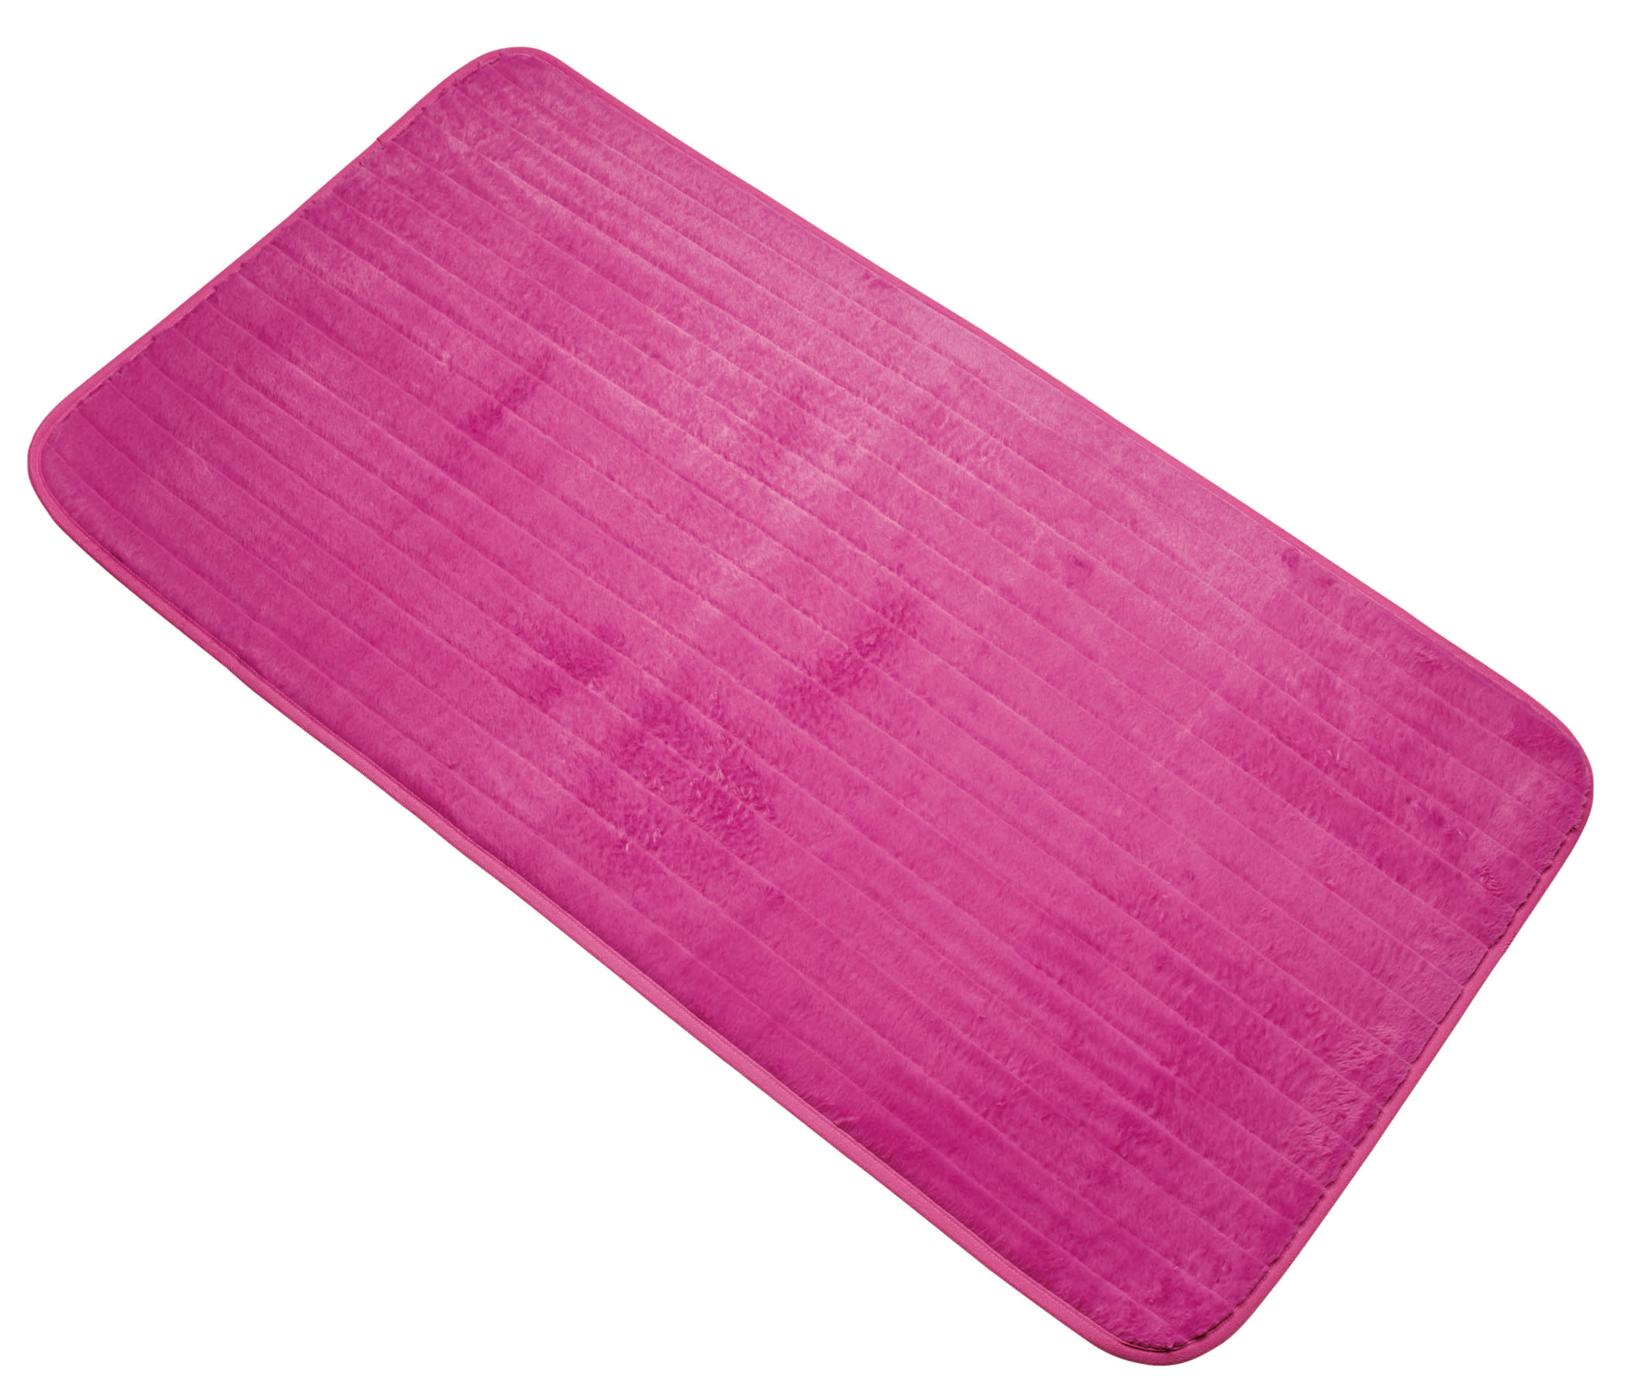 All About U 24" x 48" Ribbed Fur Area Rug, Pink; image 1 of 2